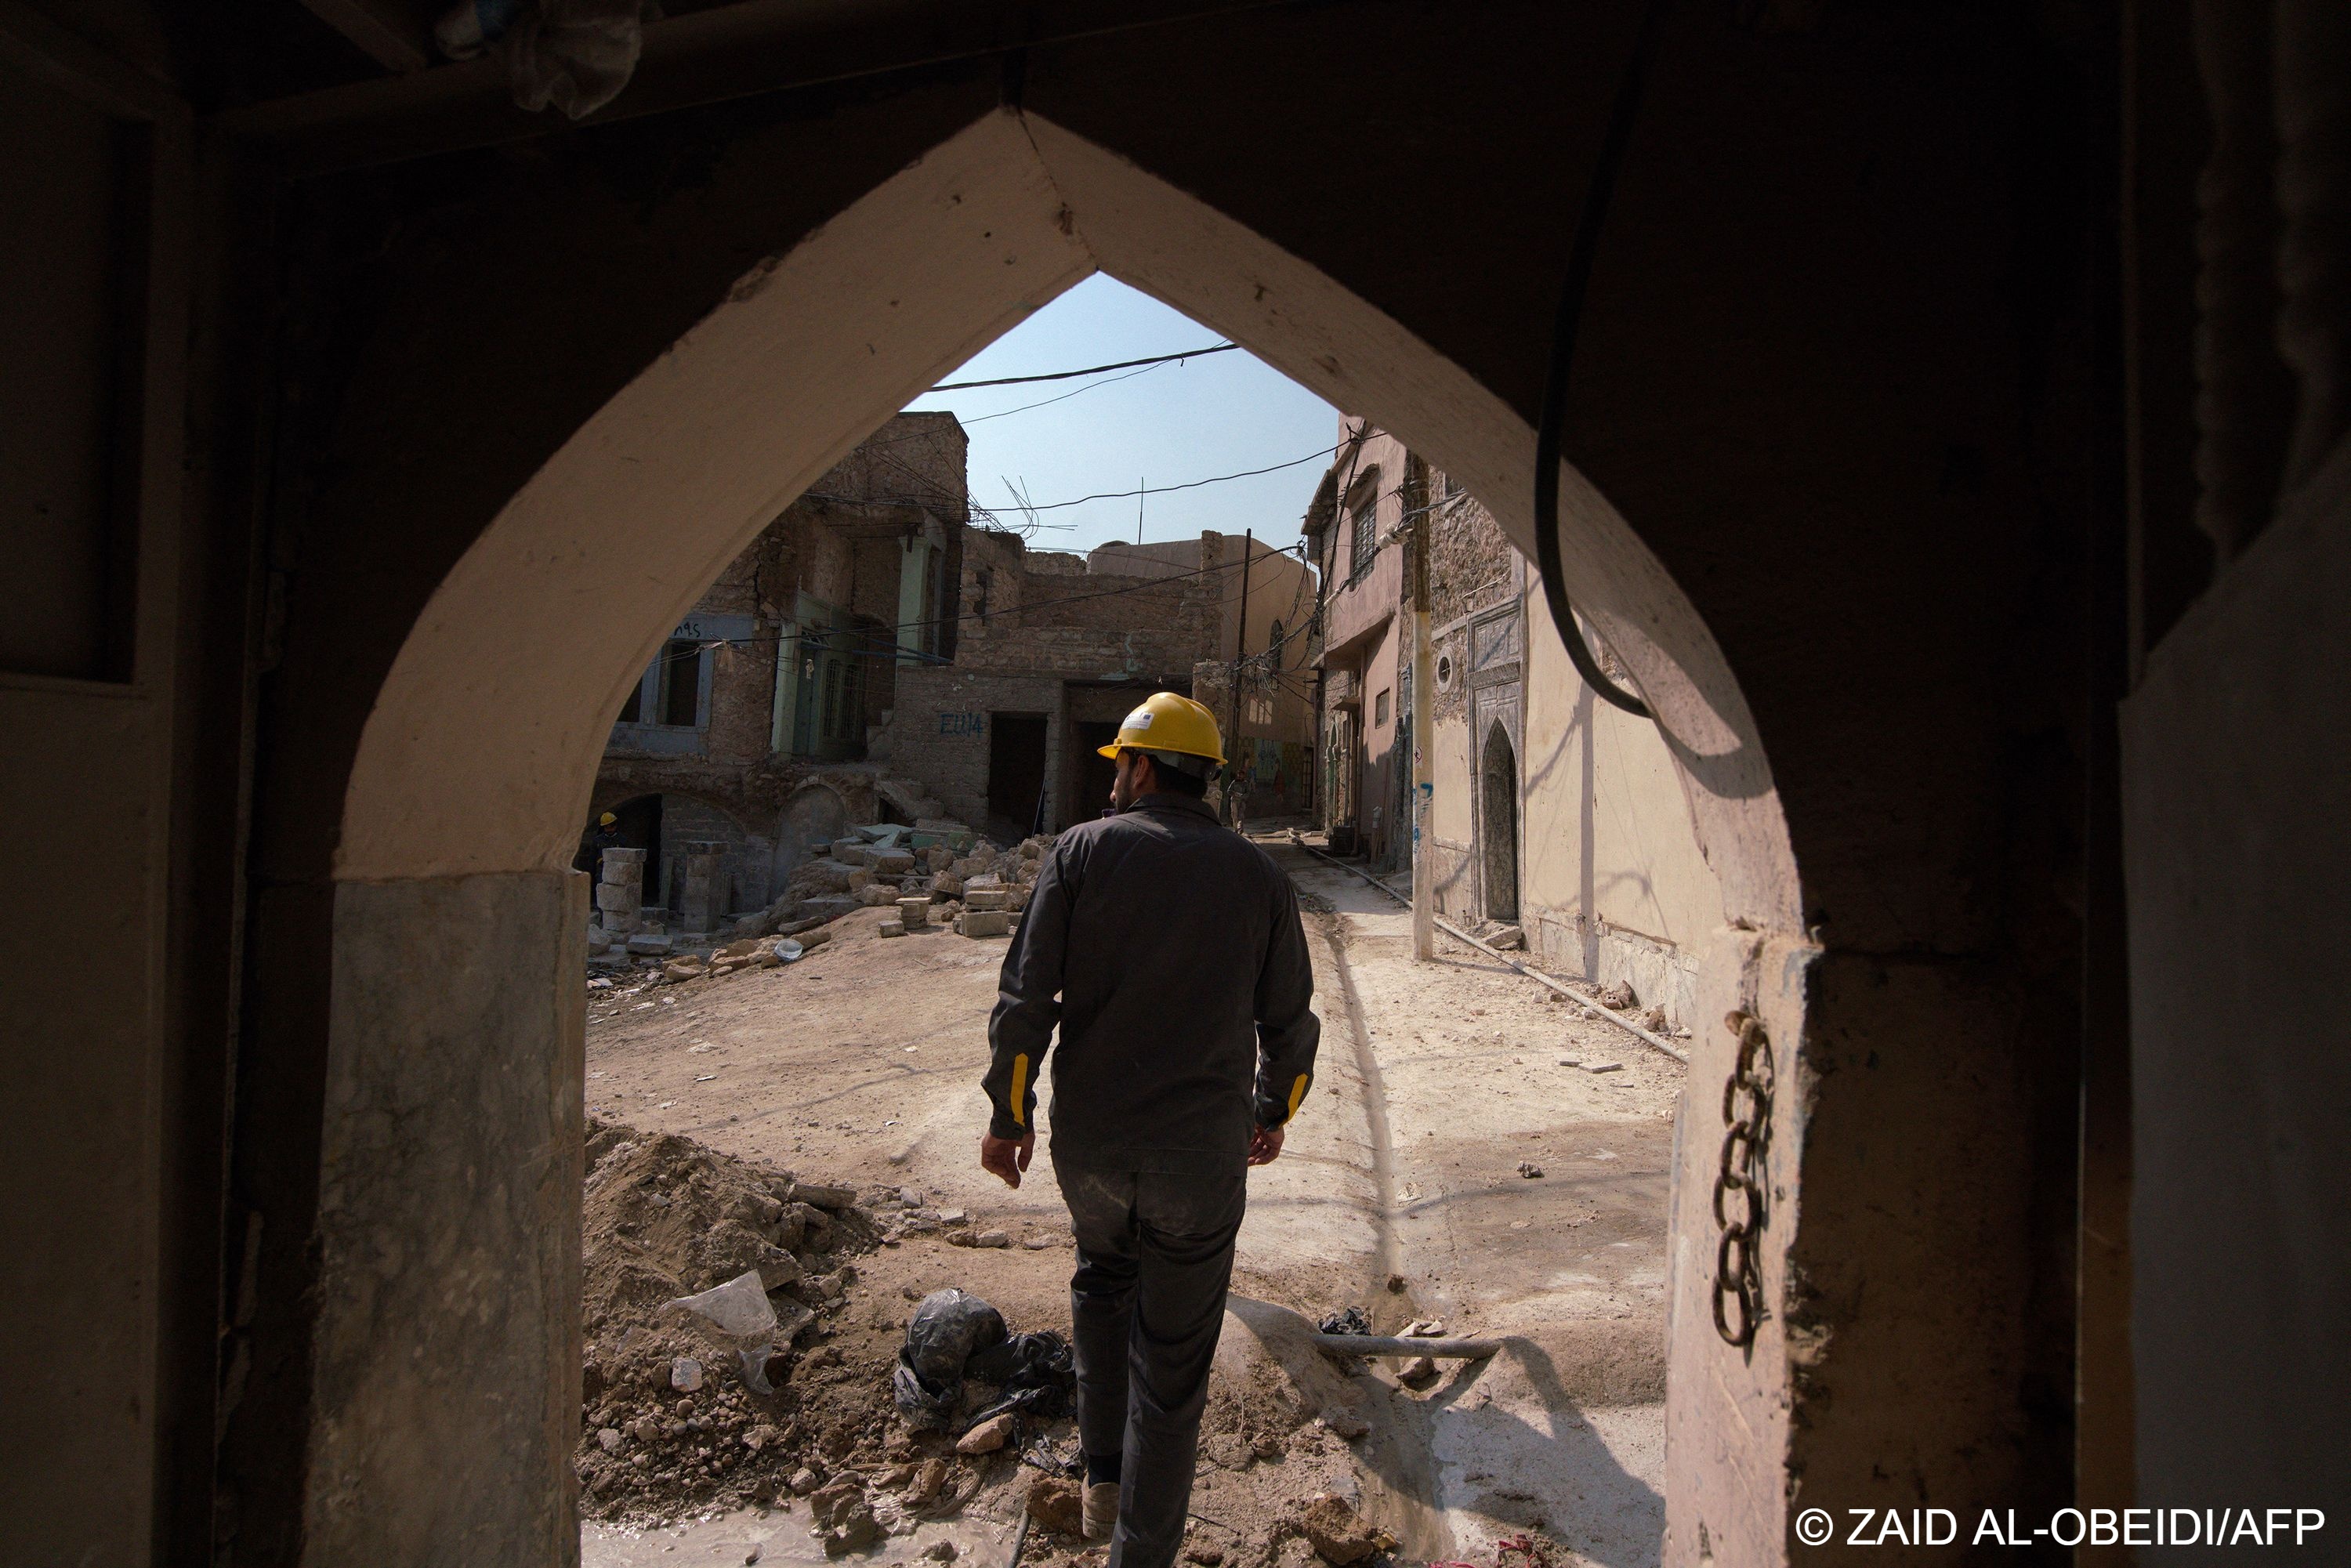 A picture shows an Iraqi architect exiting a traditional house amid renovations in the old town of Iraq‘s northern city of Mosul.